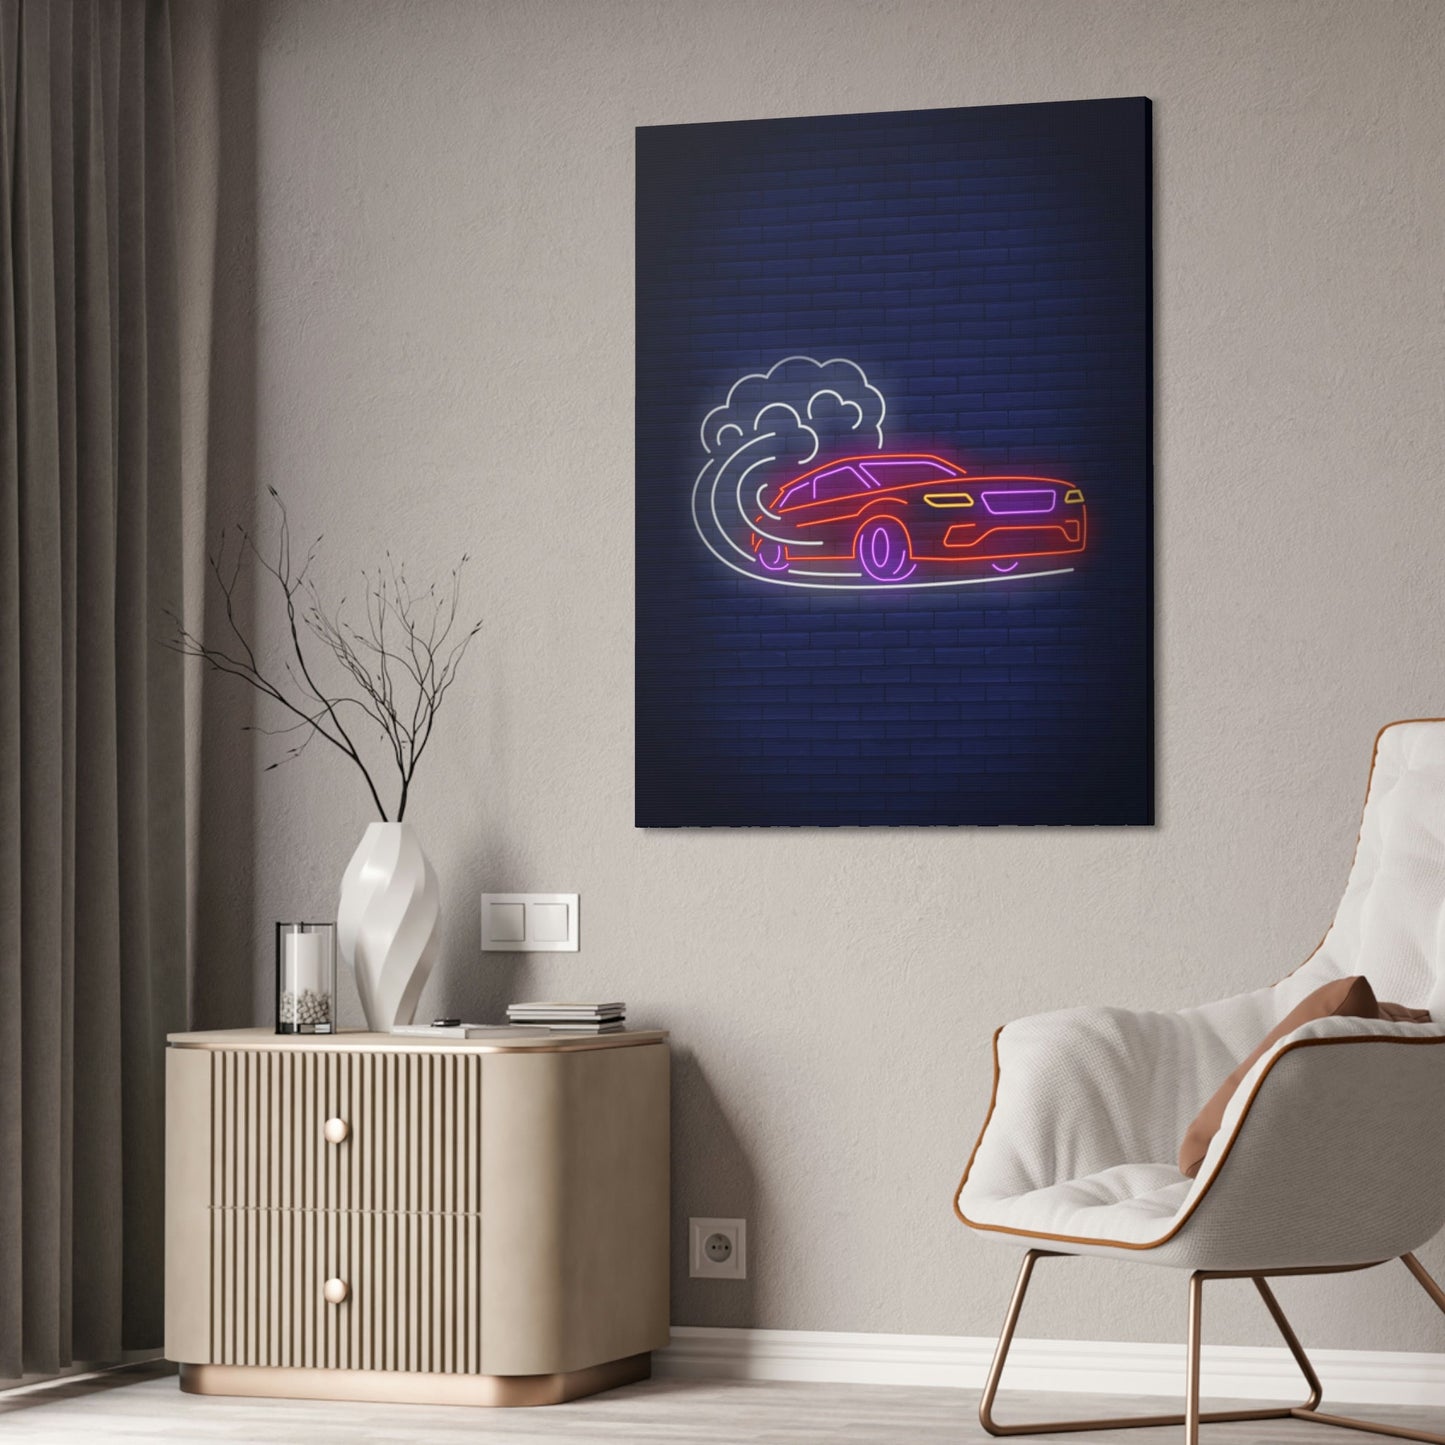 Enchanted by Neon Nights: Premium Canvas Prints for Exquisite Wall Decor